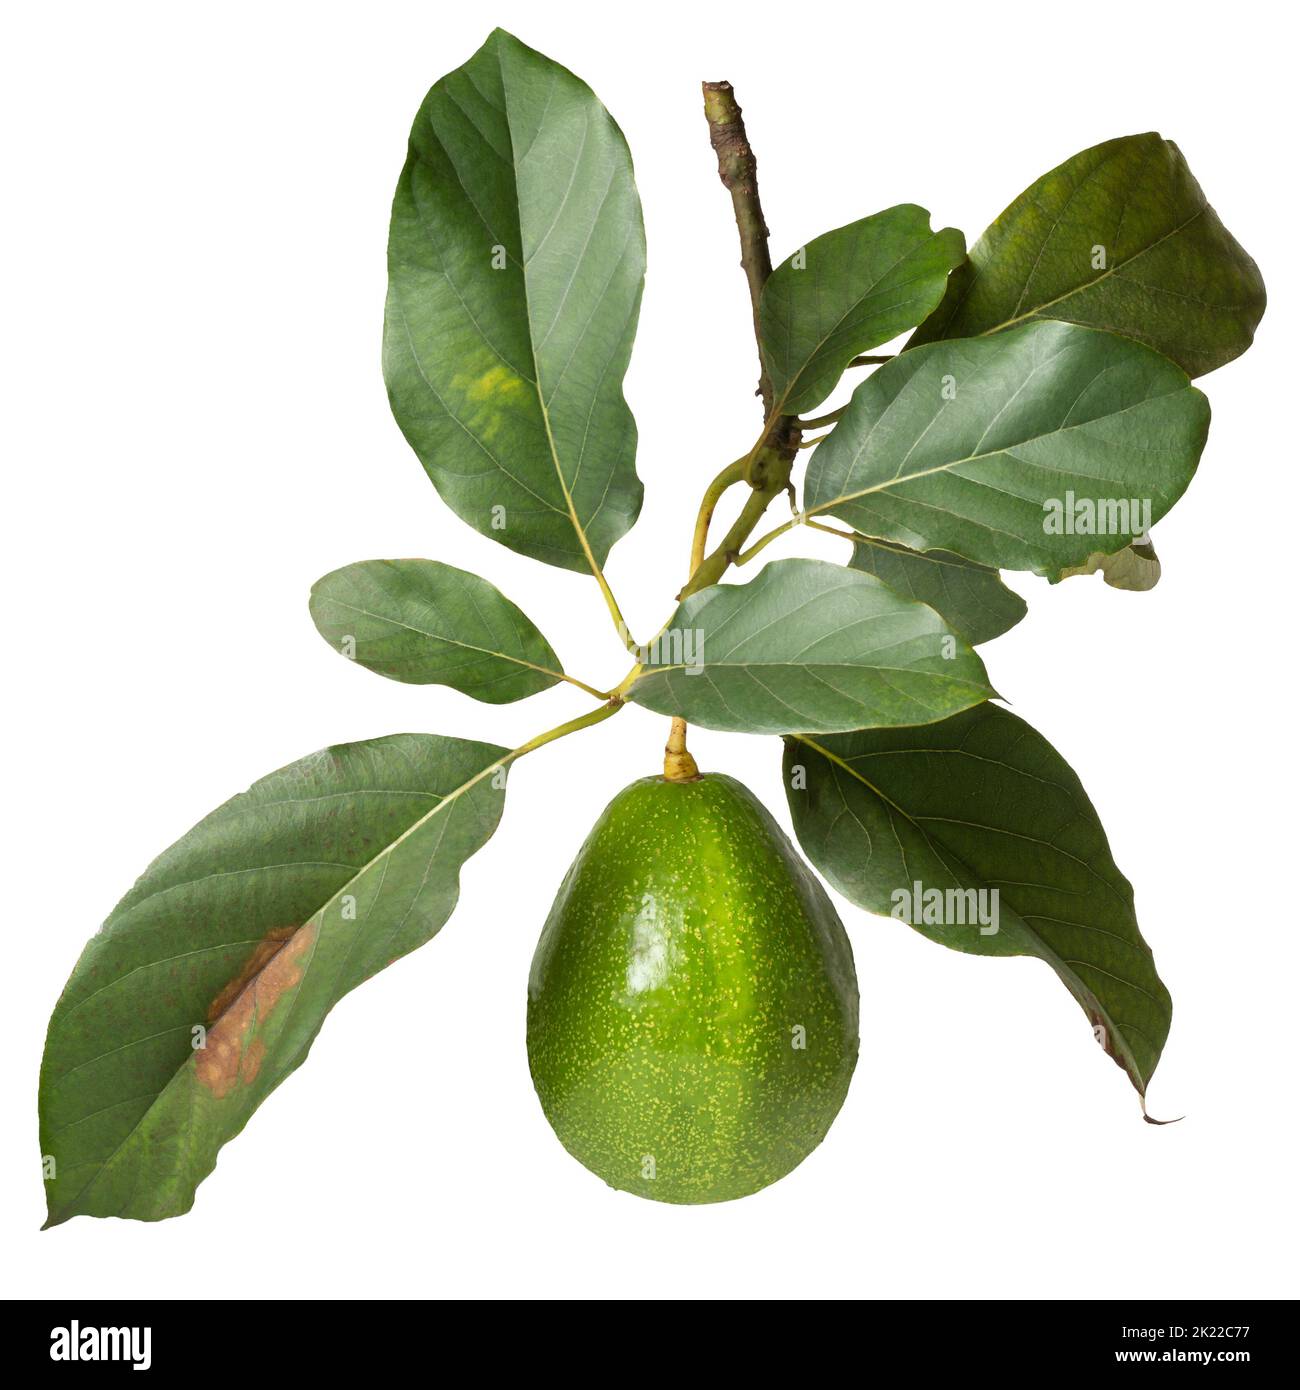 avocado in the tree branch isolated on white background, also known as alligator pear or butter fruit, fresh fruit with leaves Stock Photo